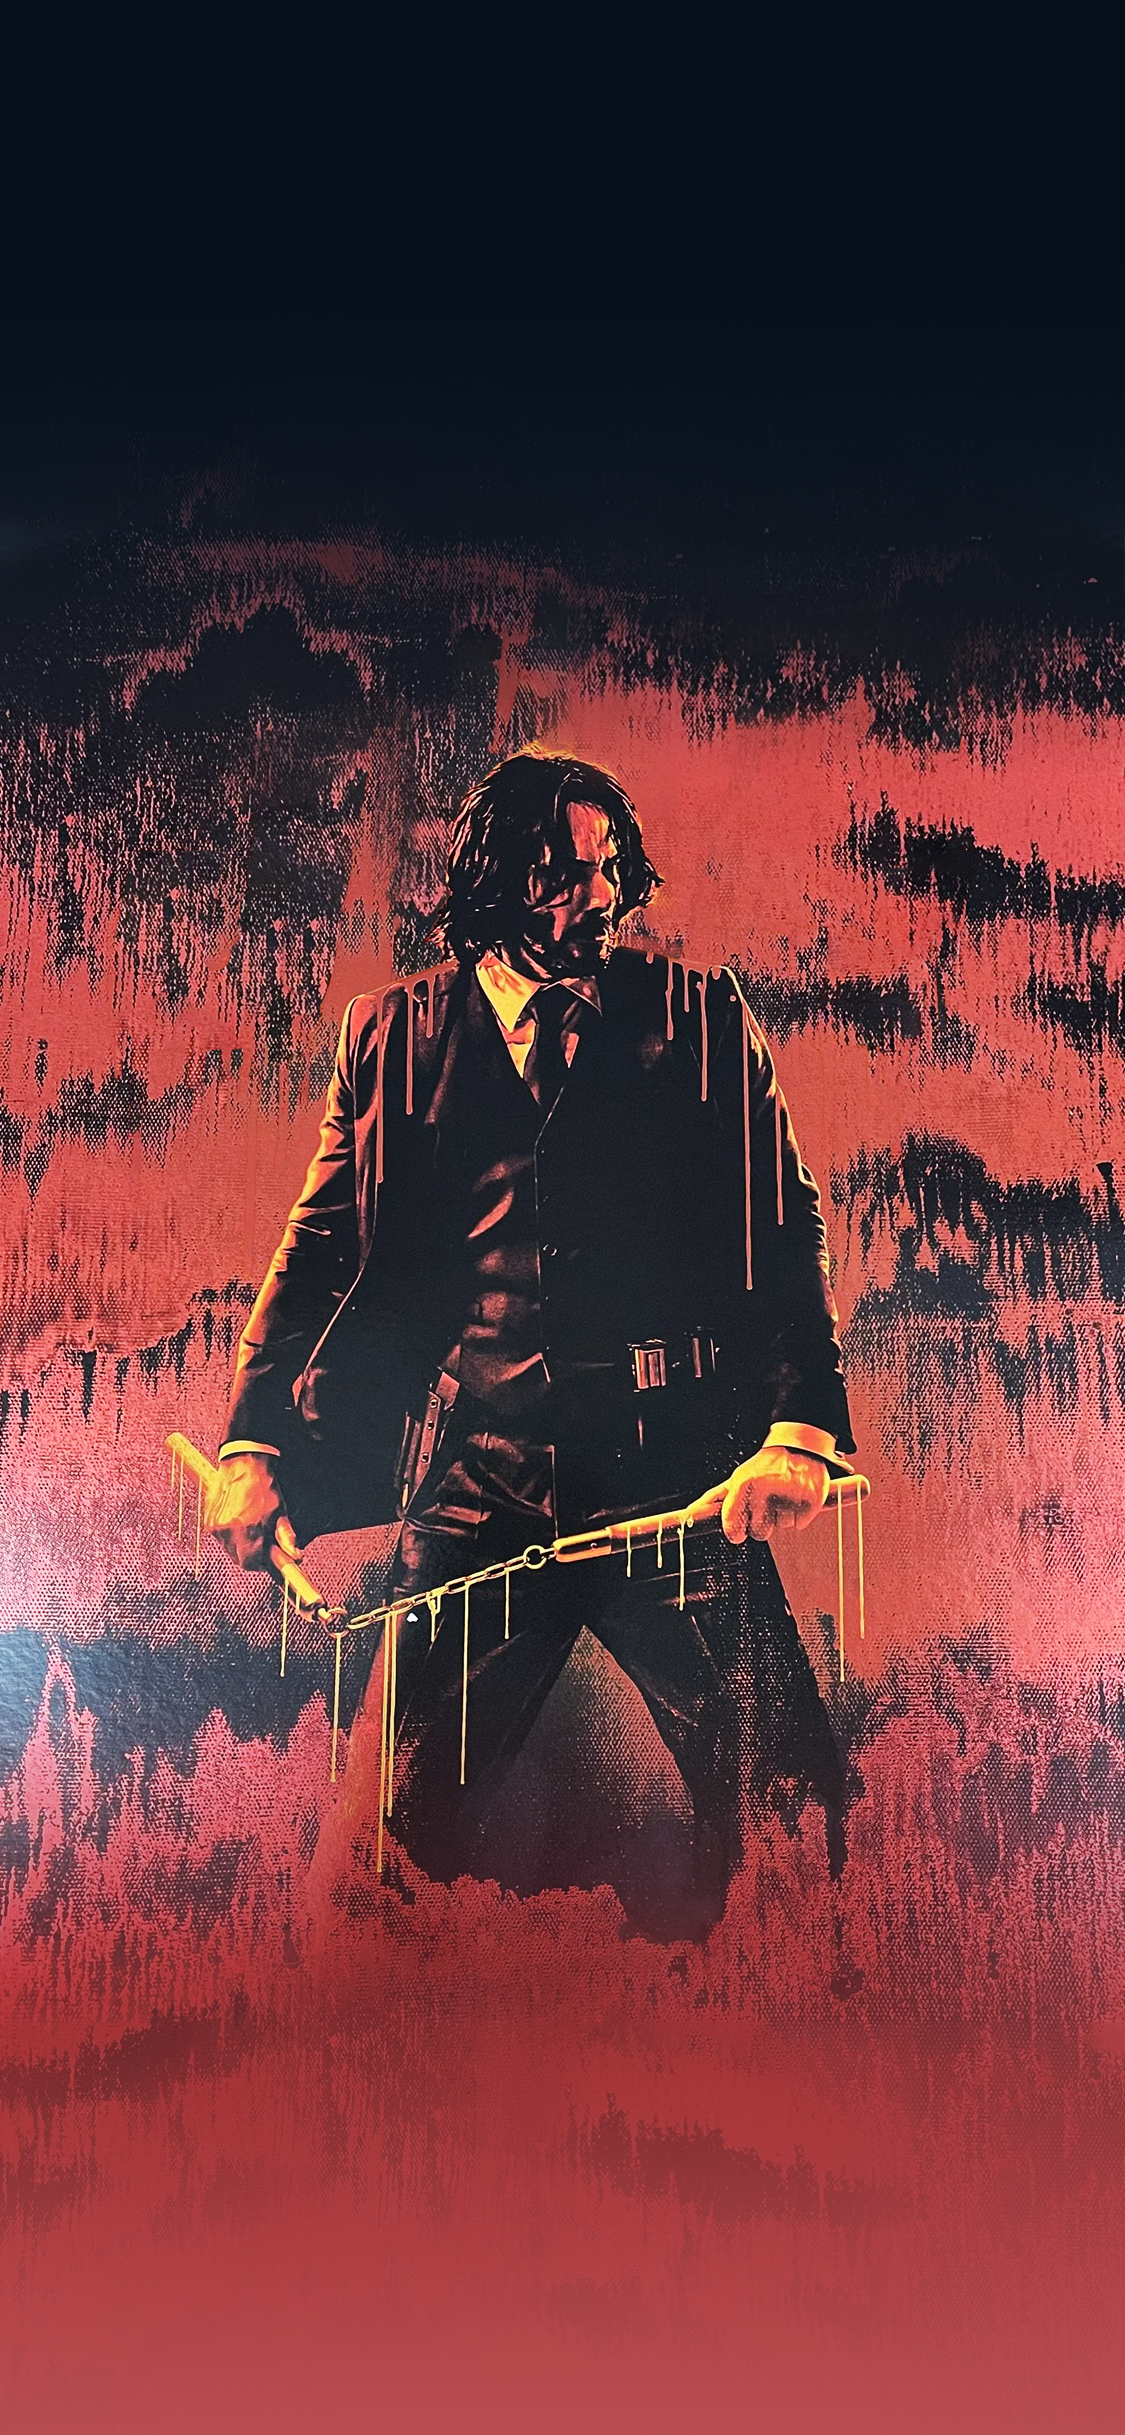 Remove The Text From Sdcc John Wick Poster And Converted It